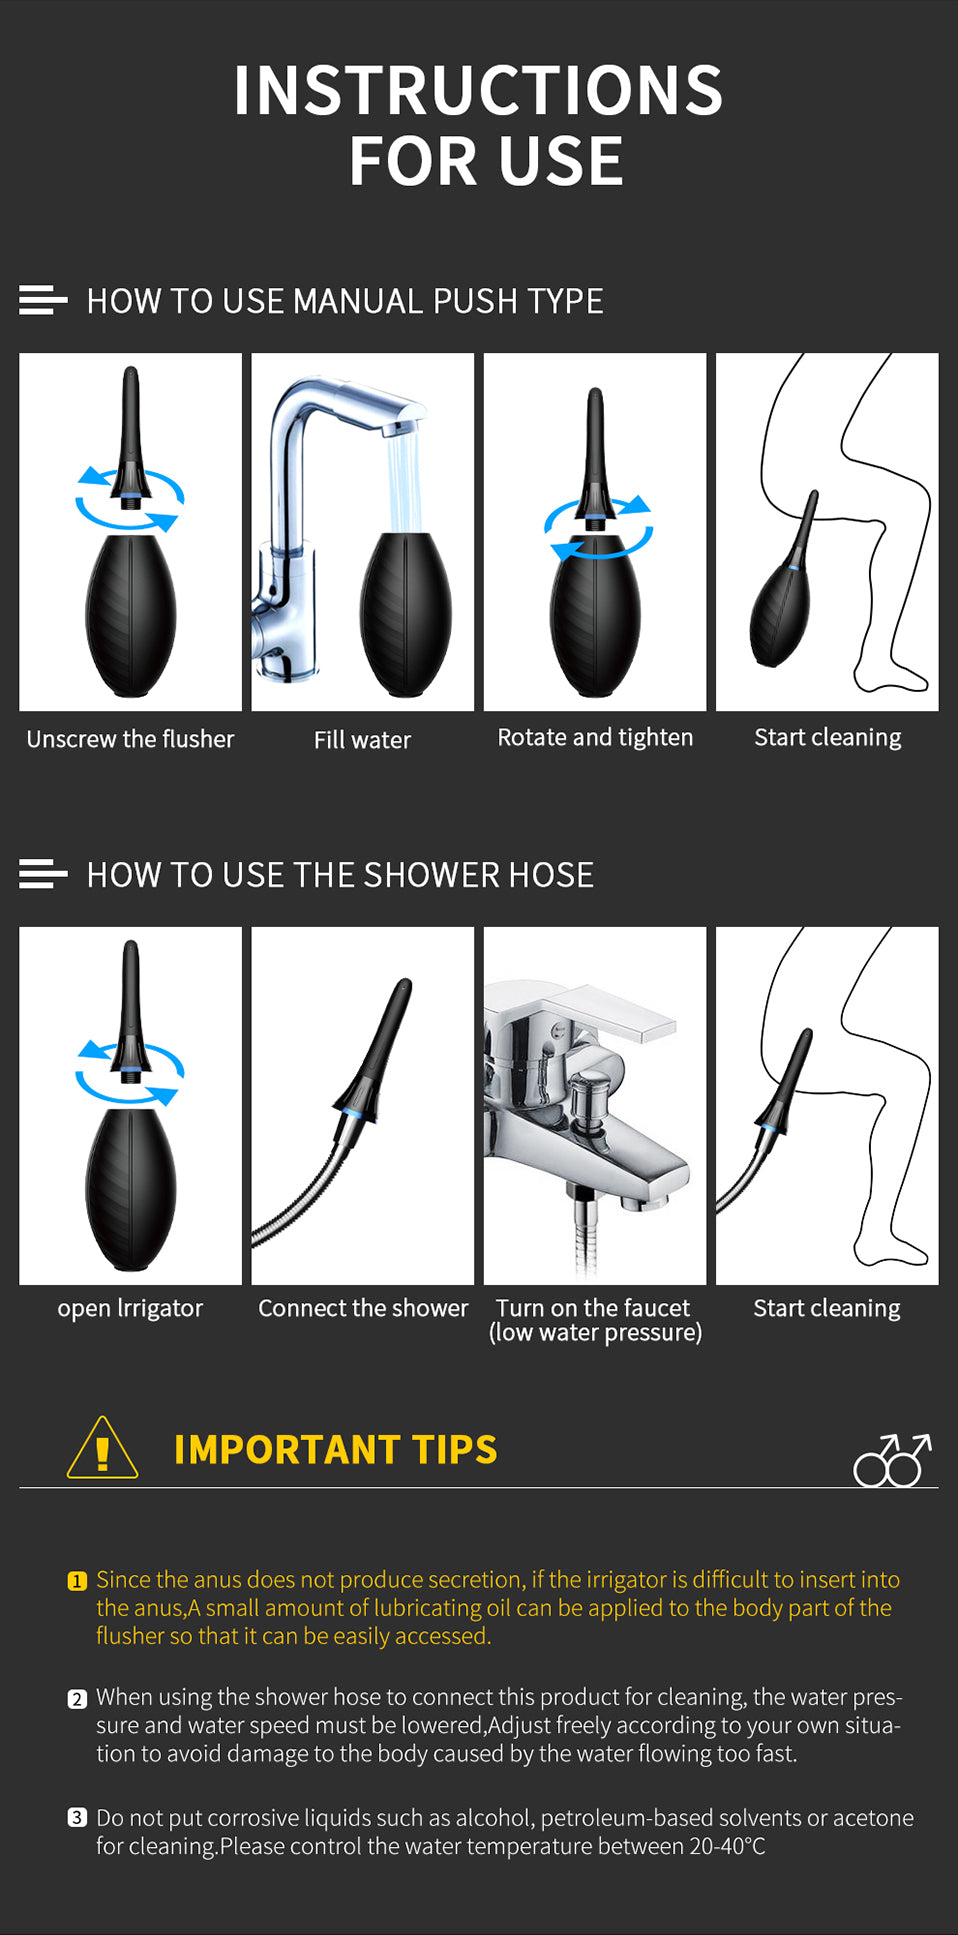 Instructions on how to use this anal douche/anal cleaner under situations of manual and connecting with a shower.